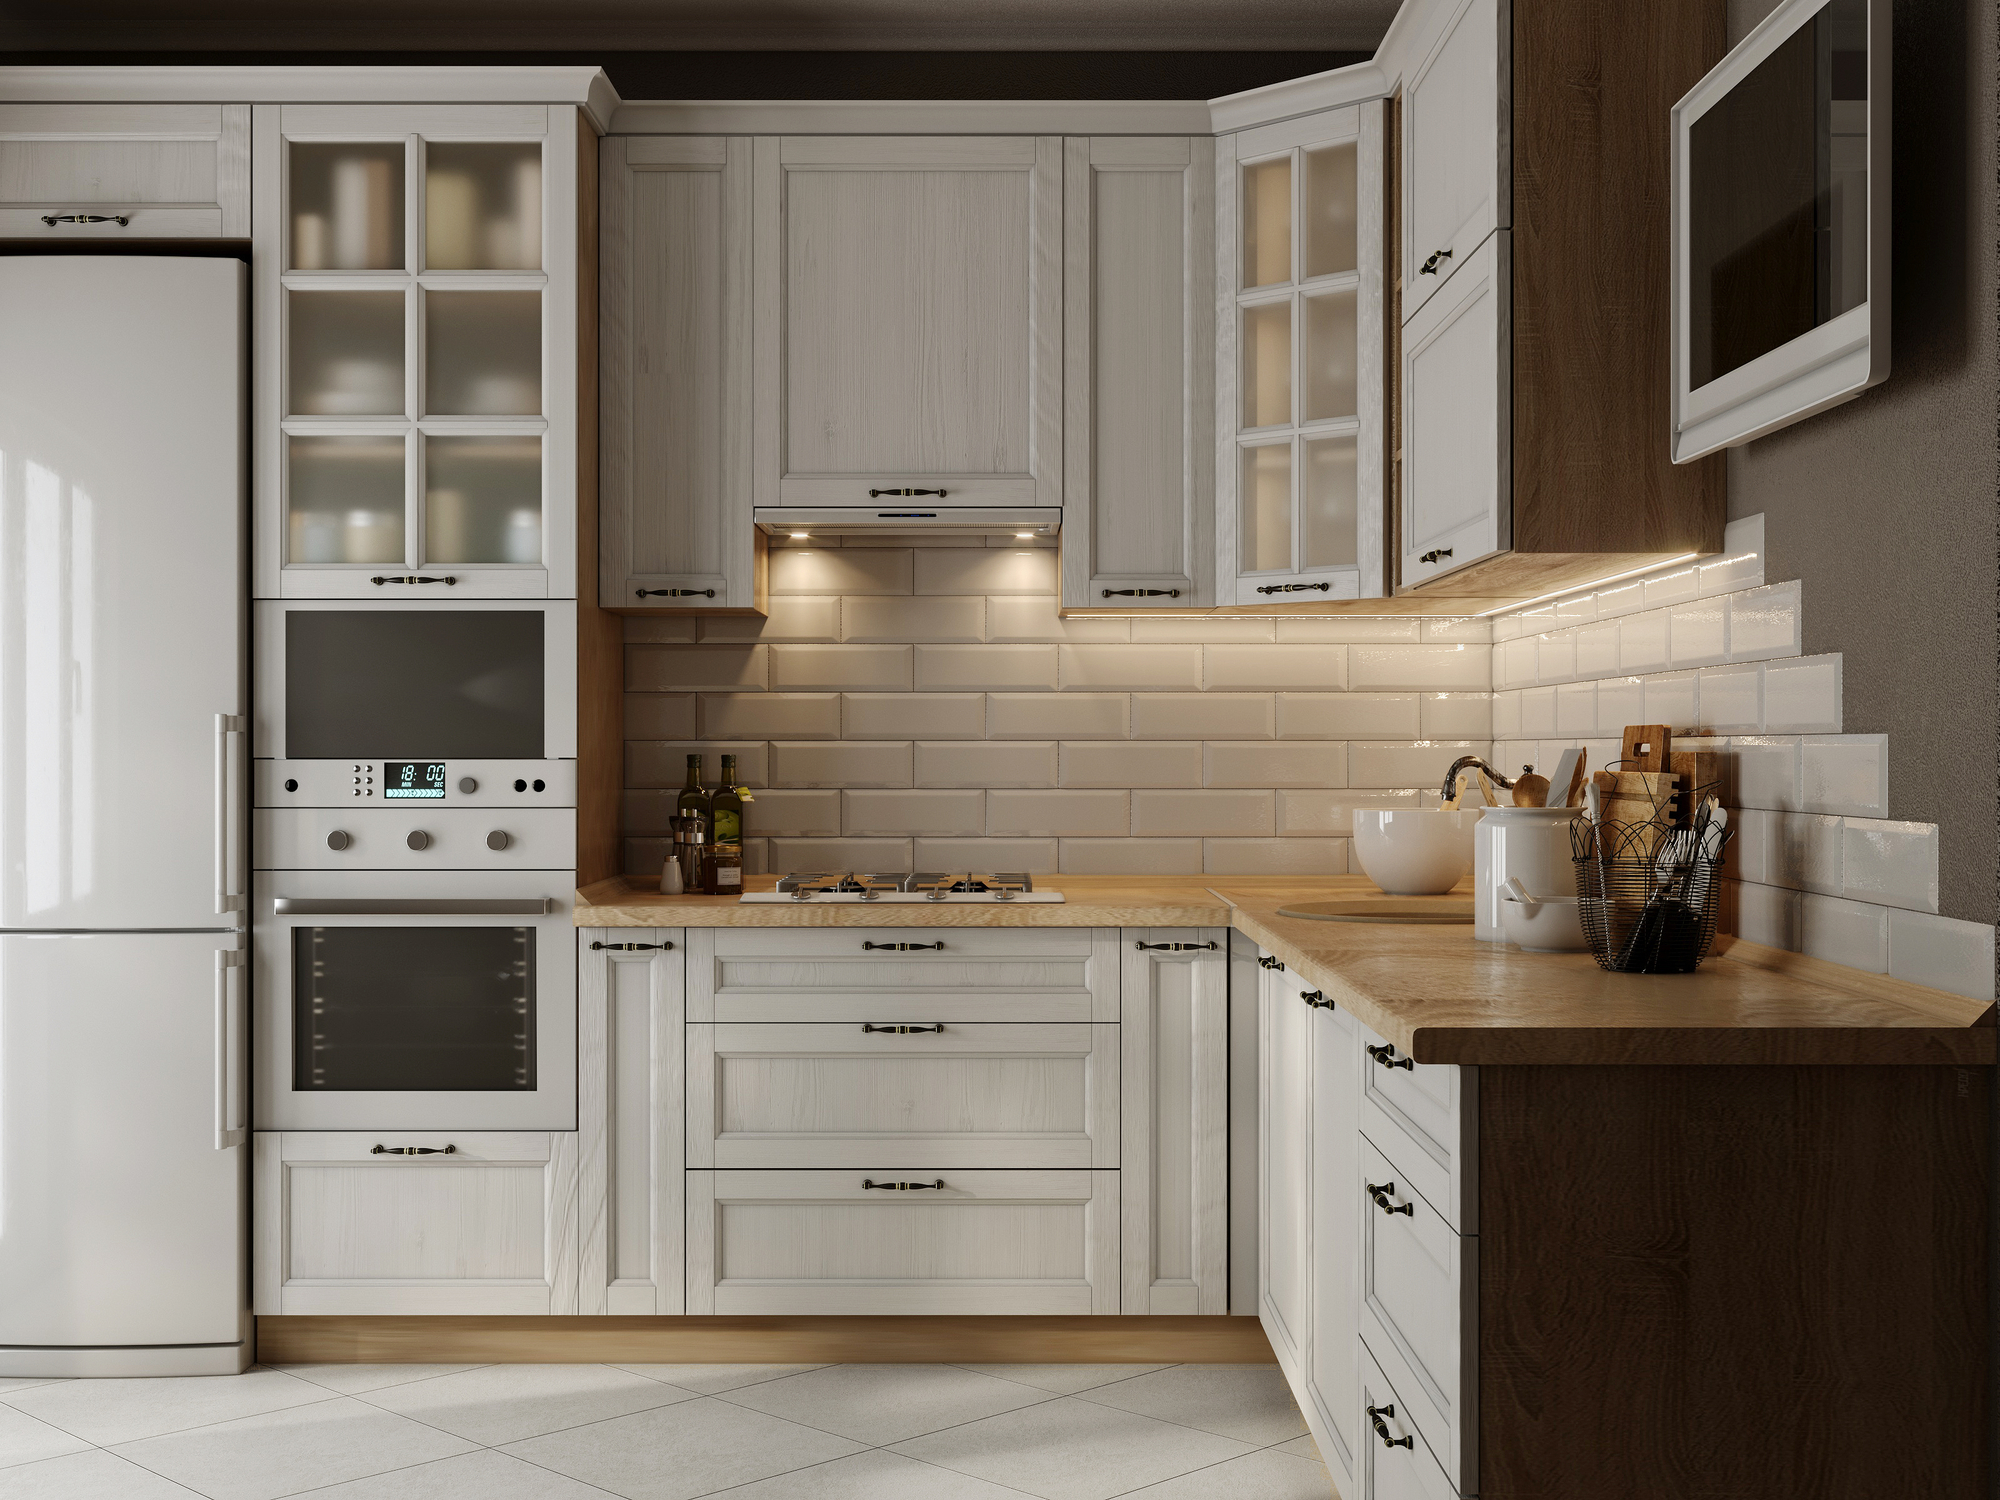 New This Week 3 Amazing Kitchens With Light Colored Cabinets